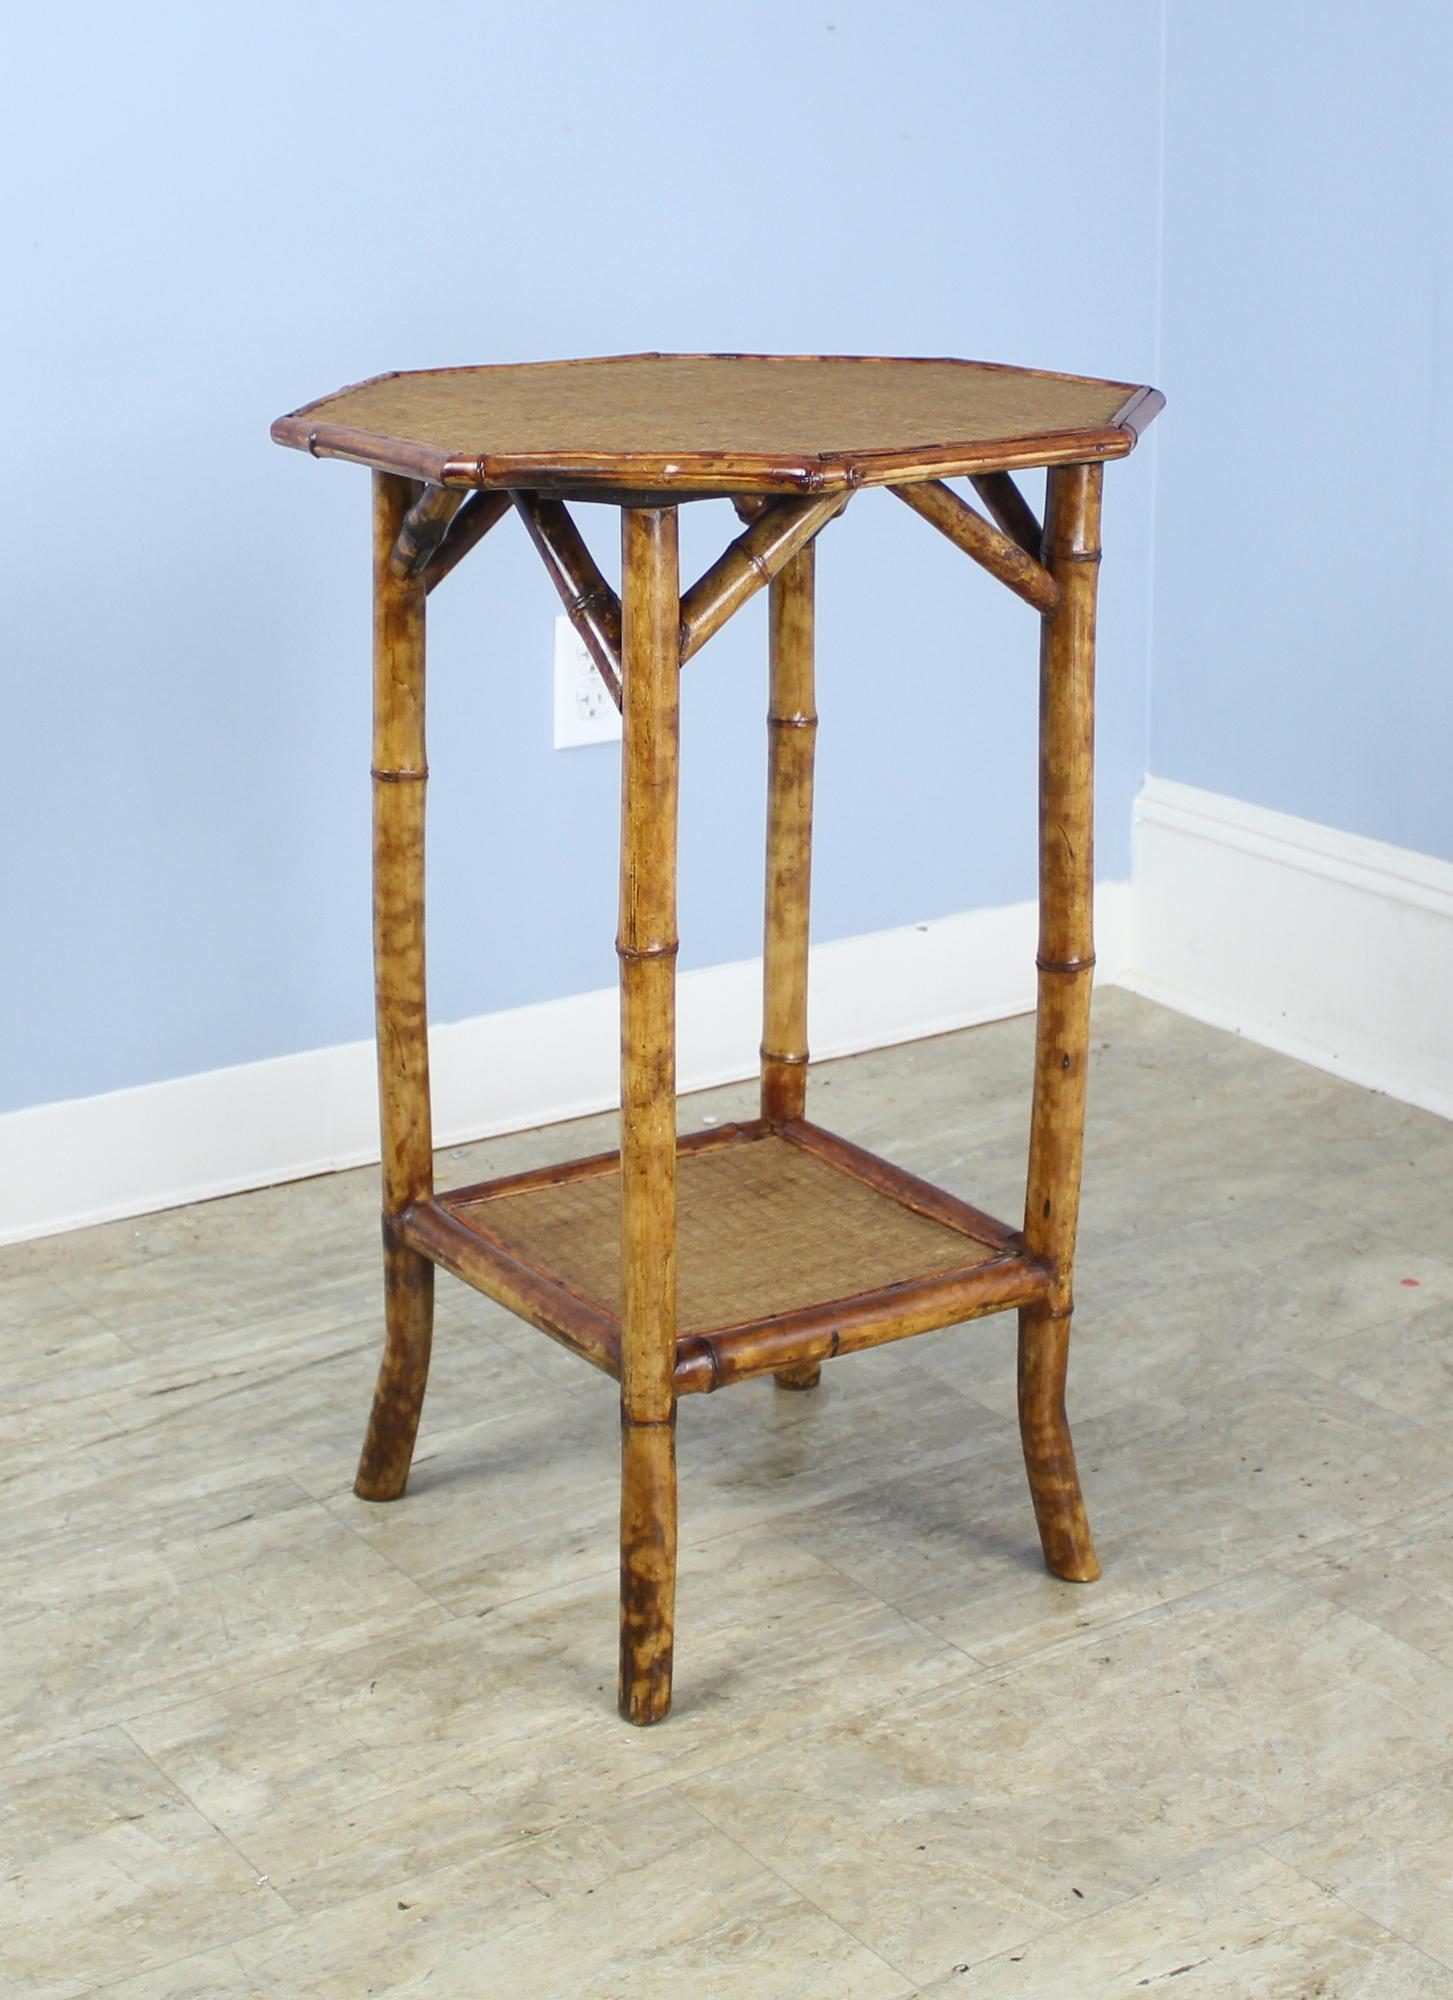 An antique English bamboo side table, with flared legs and with and an unusual octagonal top. Both shelves are made of tightly woven rattan that is in very good condition. The bamboo, vividly painted, is in good sturdy condition. Charming as an end